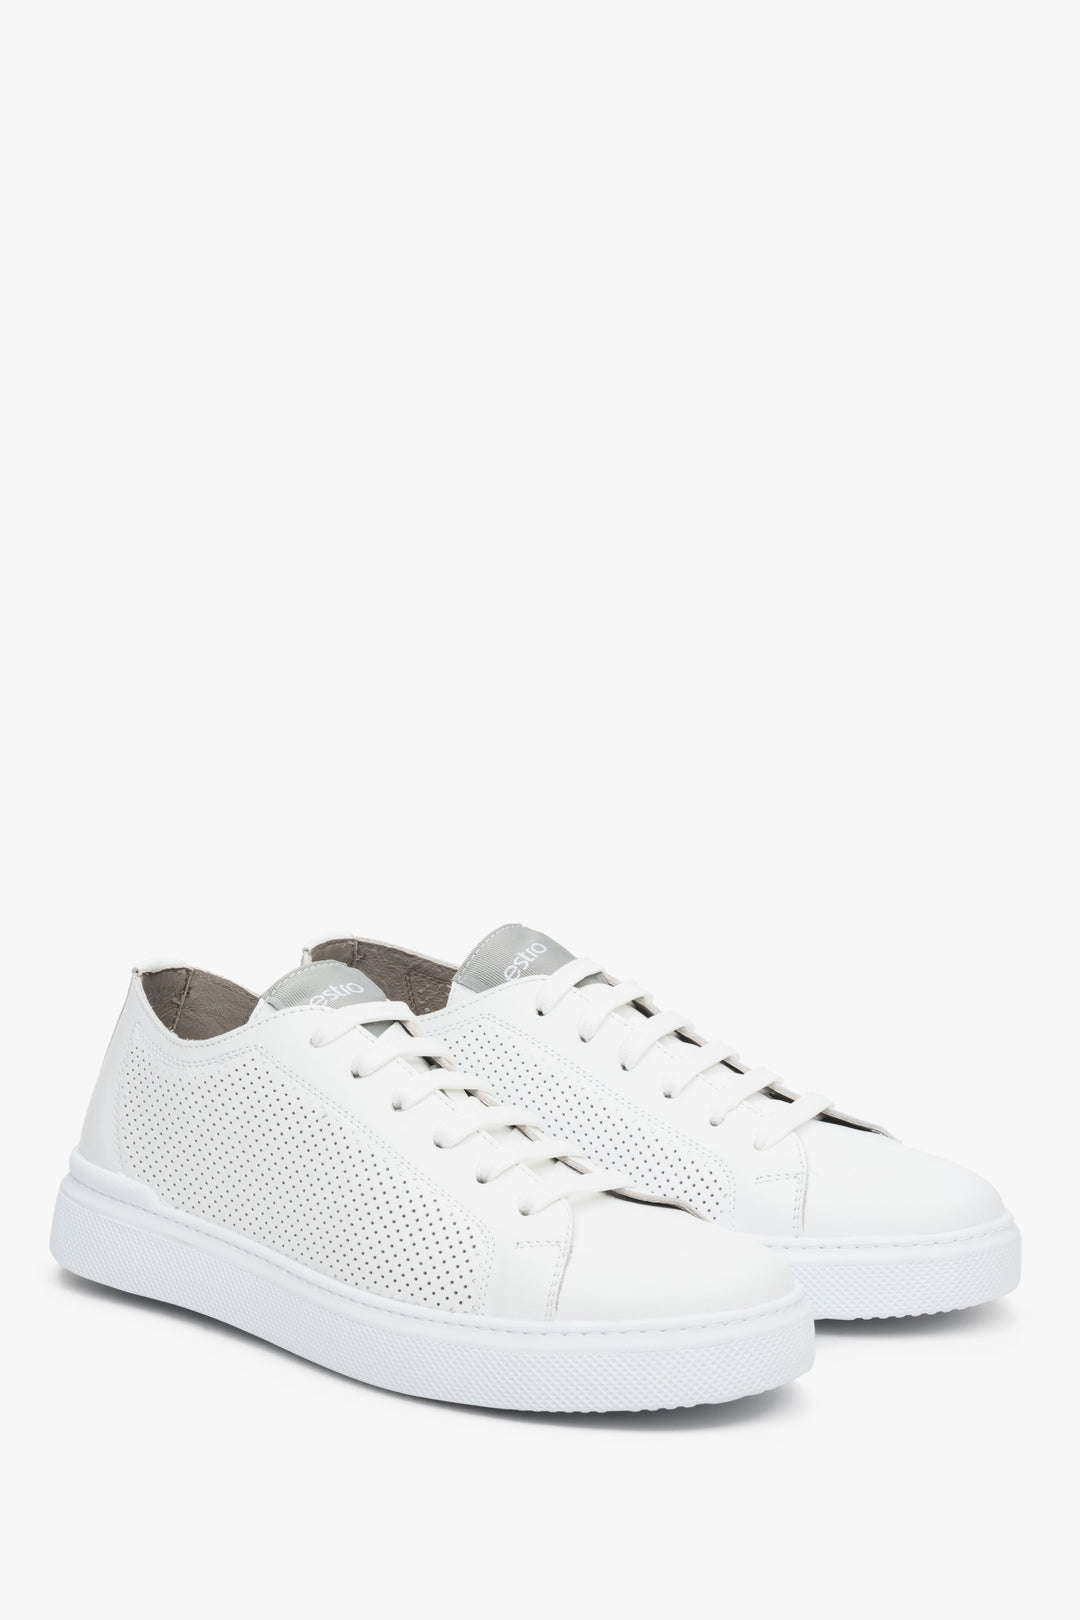 Men's perforated white sneakers made of natural leather, Estro brand.